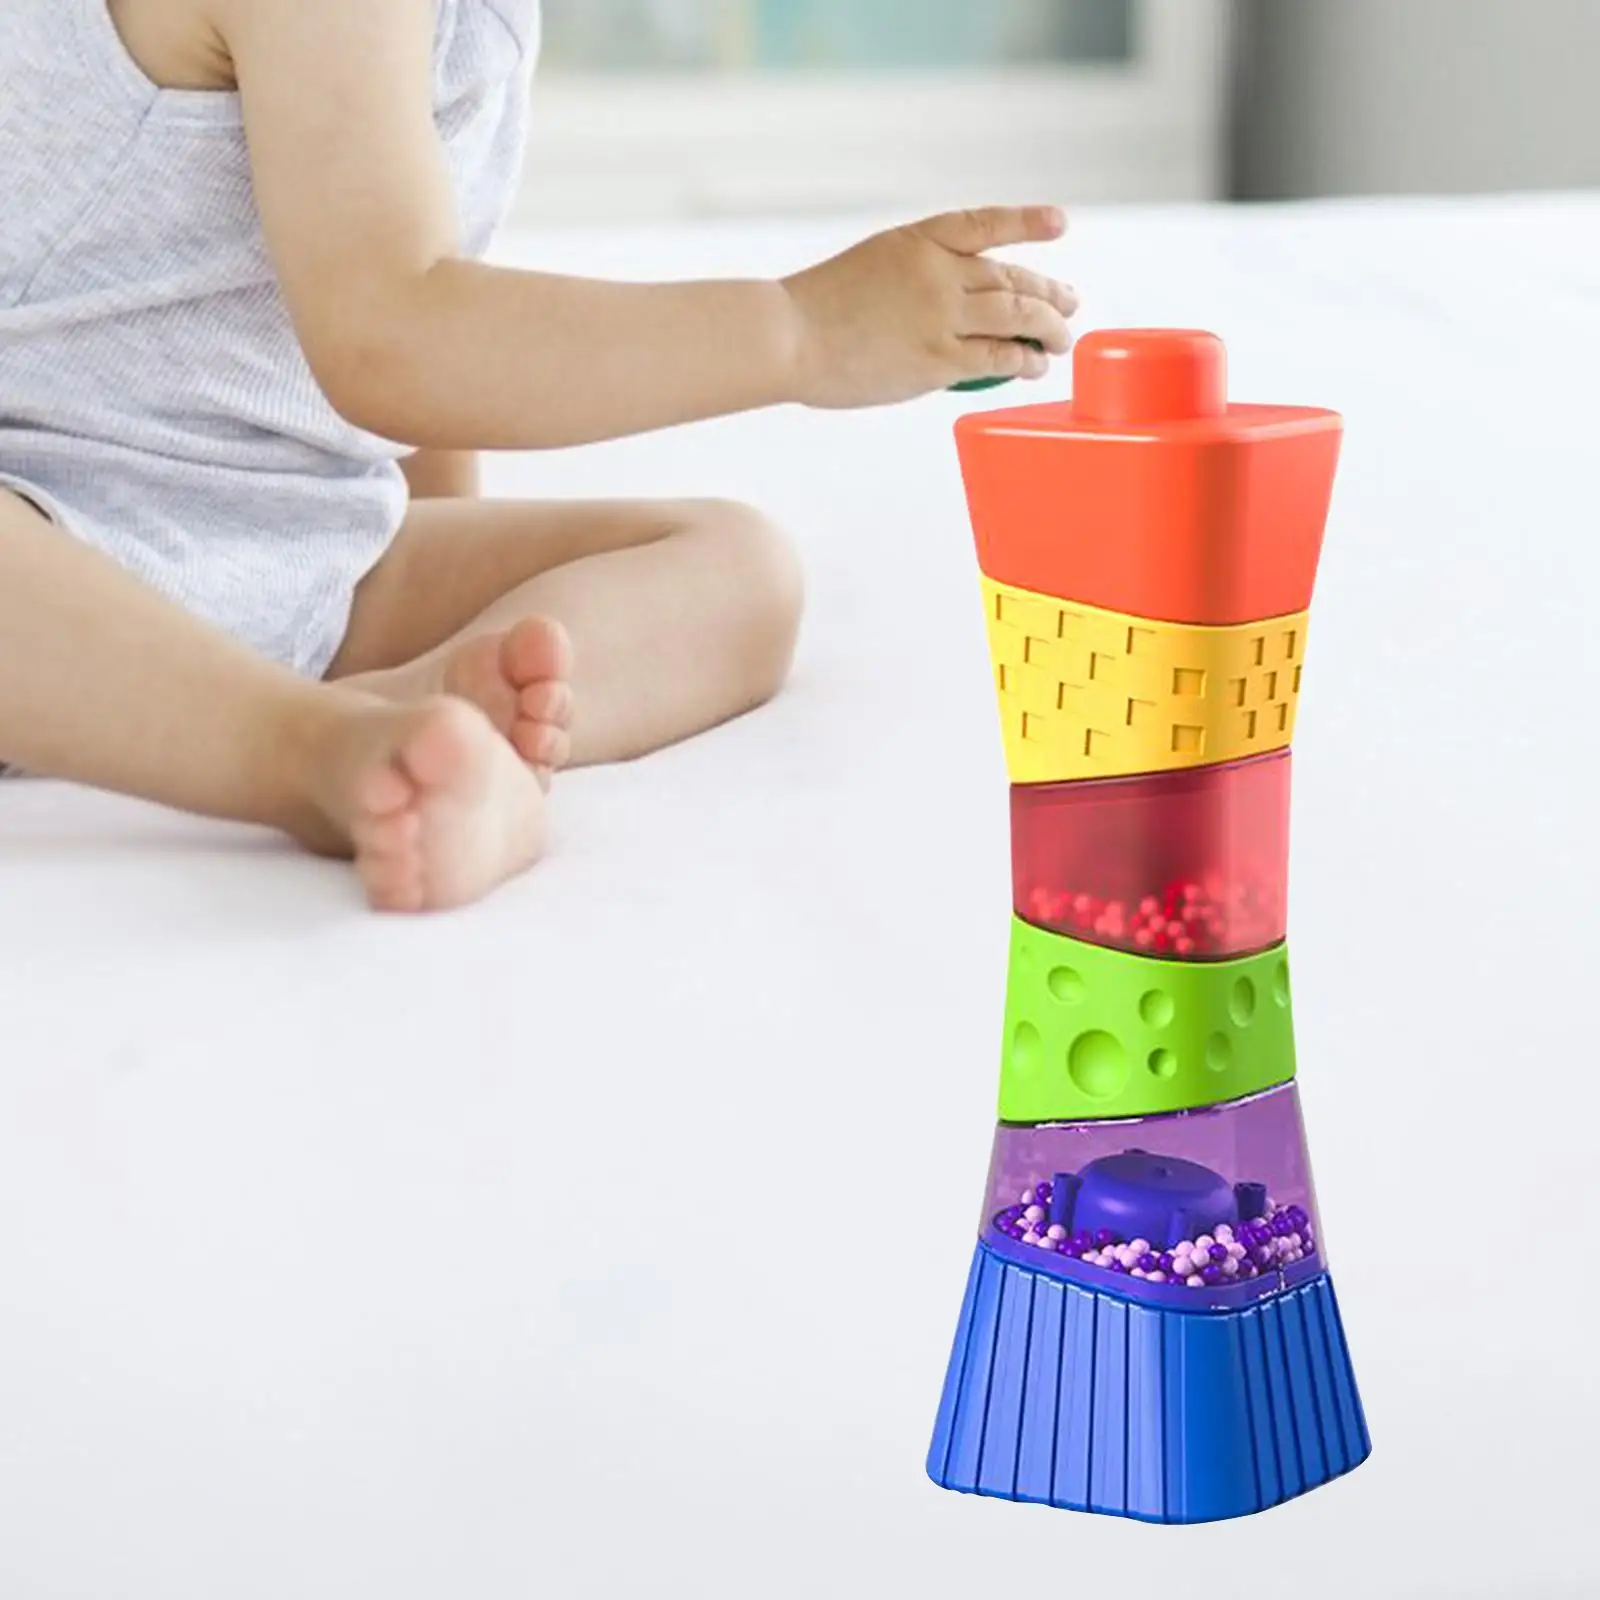 Stacking Balancing Block Puzzle Game Development Toy Stackable Toys for 1 2 3 4 5 Year Old Boys Girls Children Birthday Gift